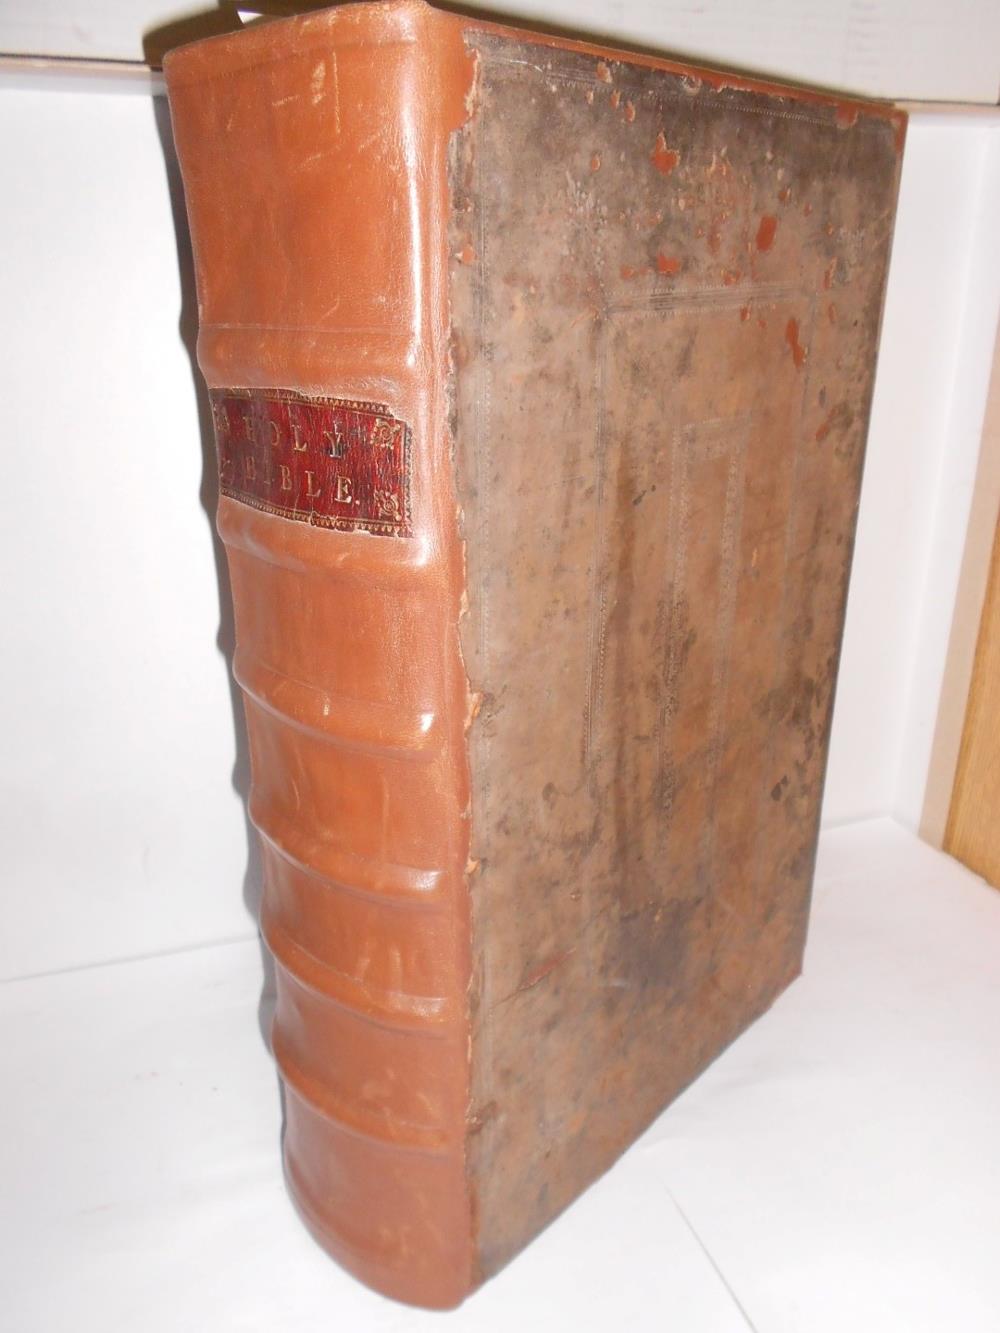 Bibles and Prayer Books. Various 17th and 18th century prayer books and Bibles, including: An